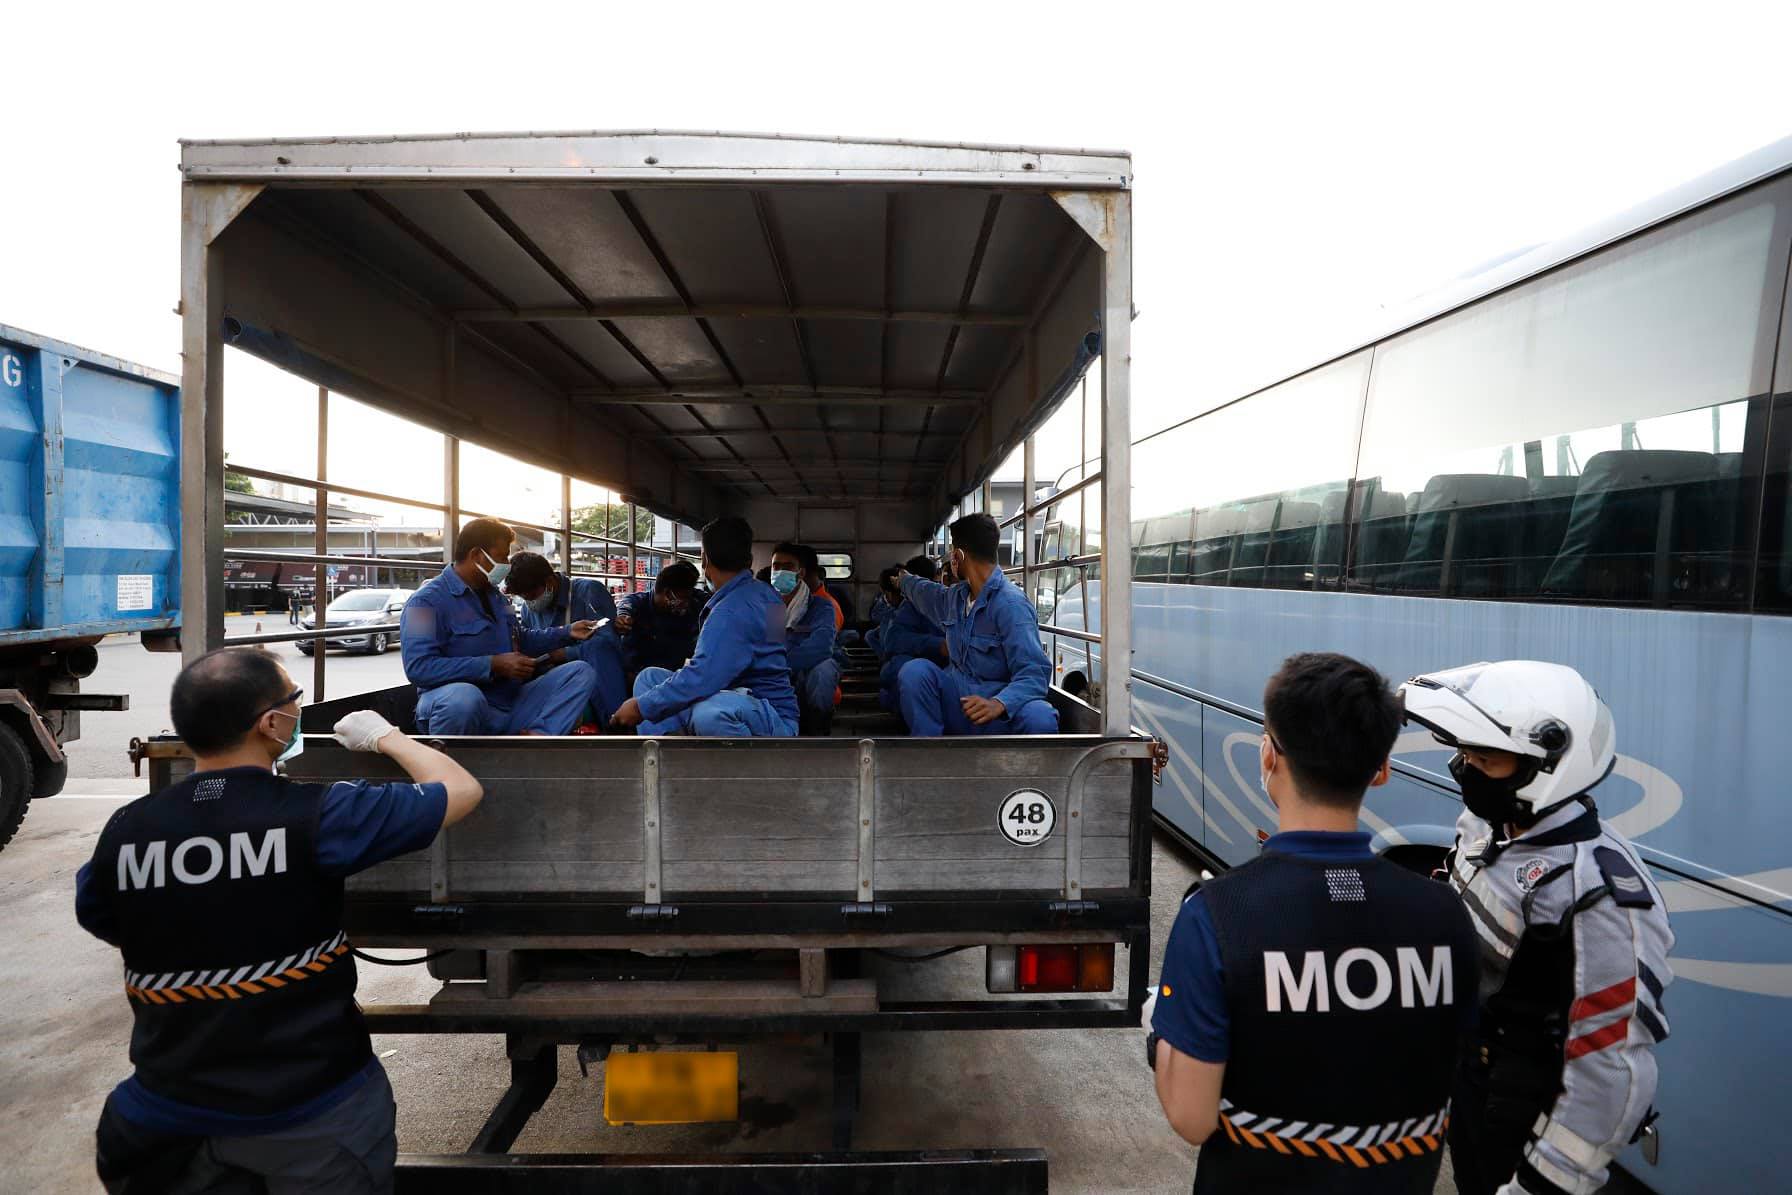 Ministry of Manpower officers question migrant workers in the back of a truck in an undated photo. Photo: Ministry of Manpower/Facebook